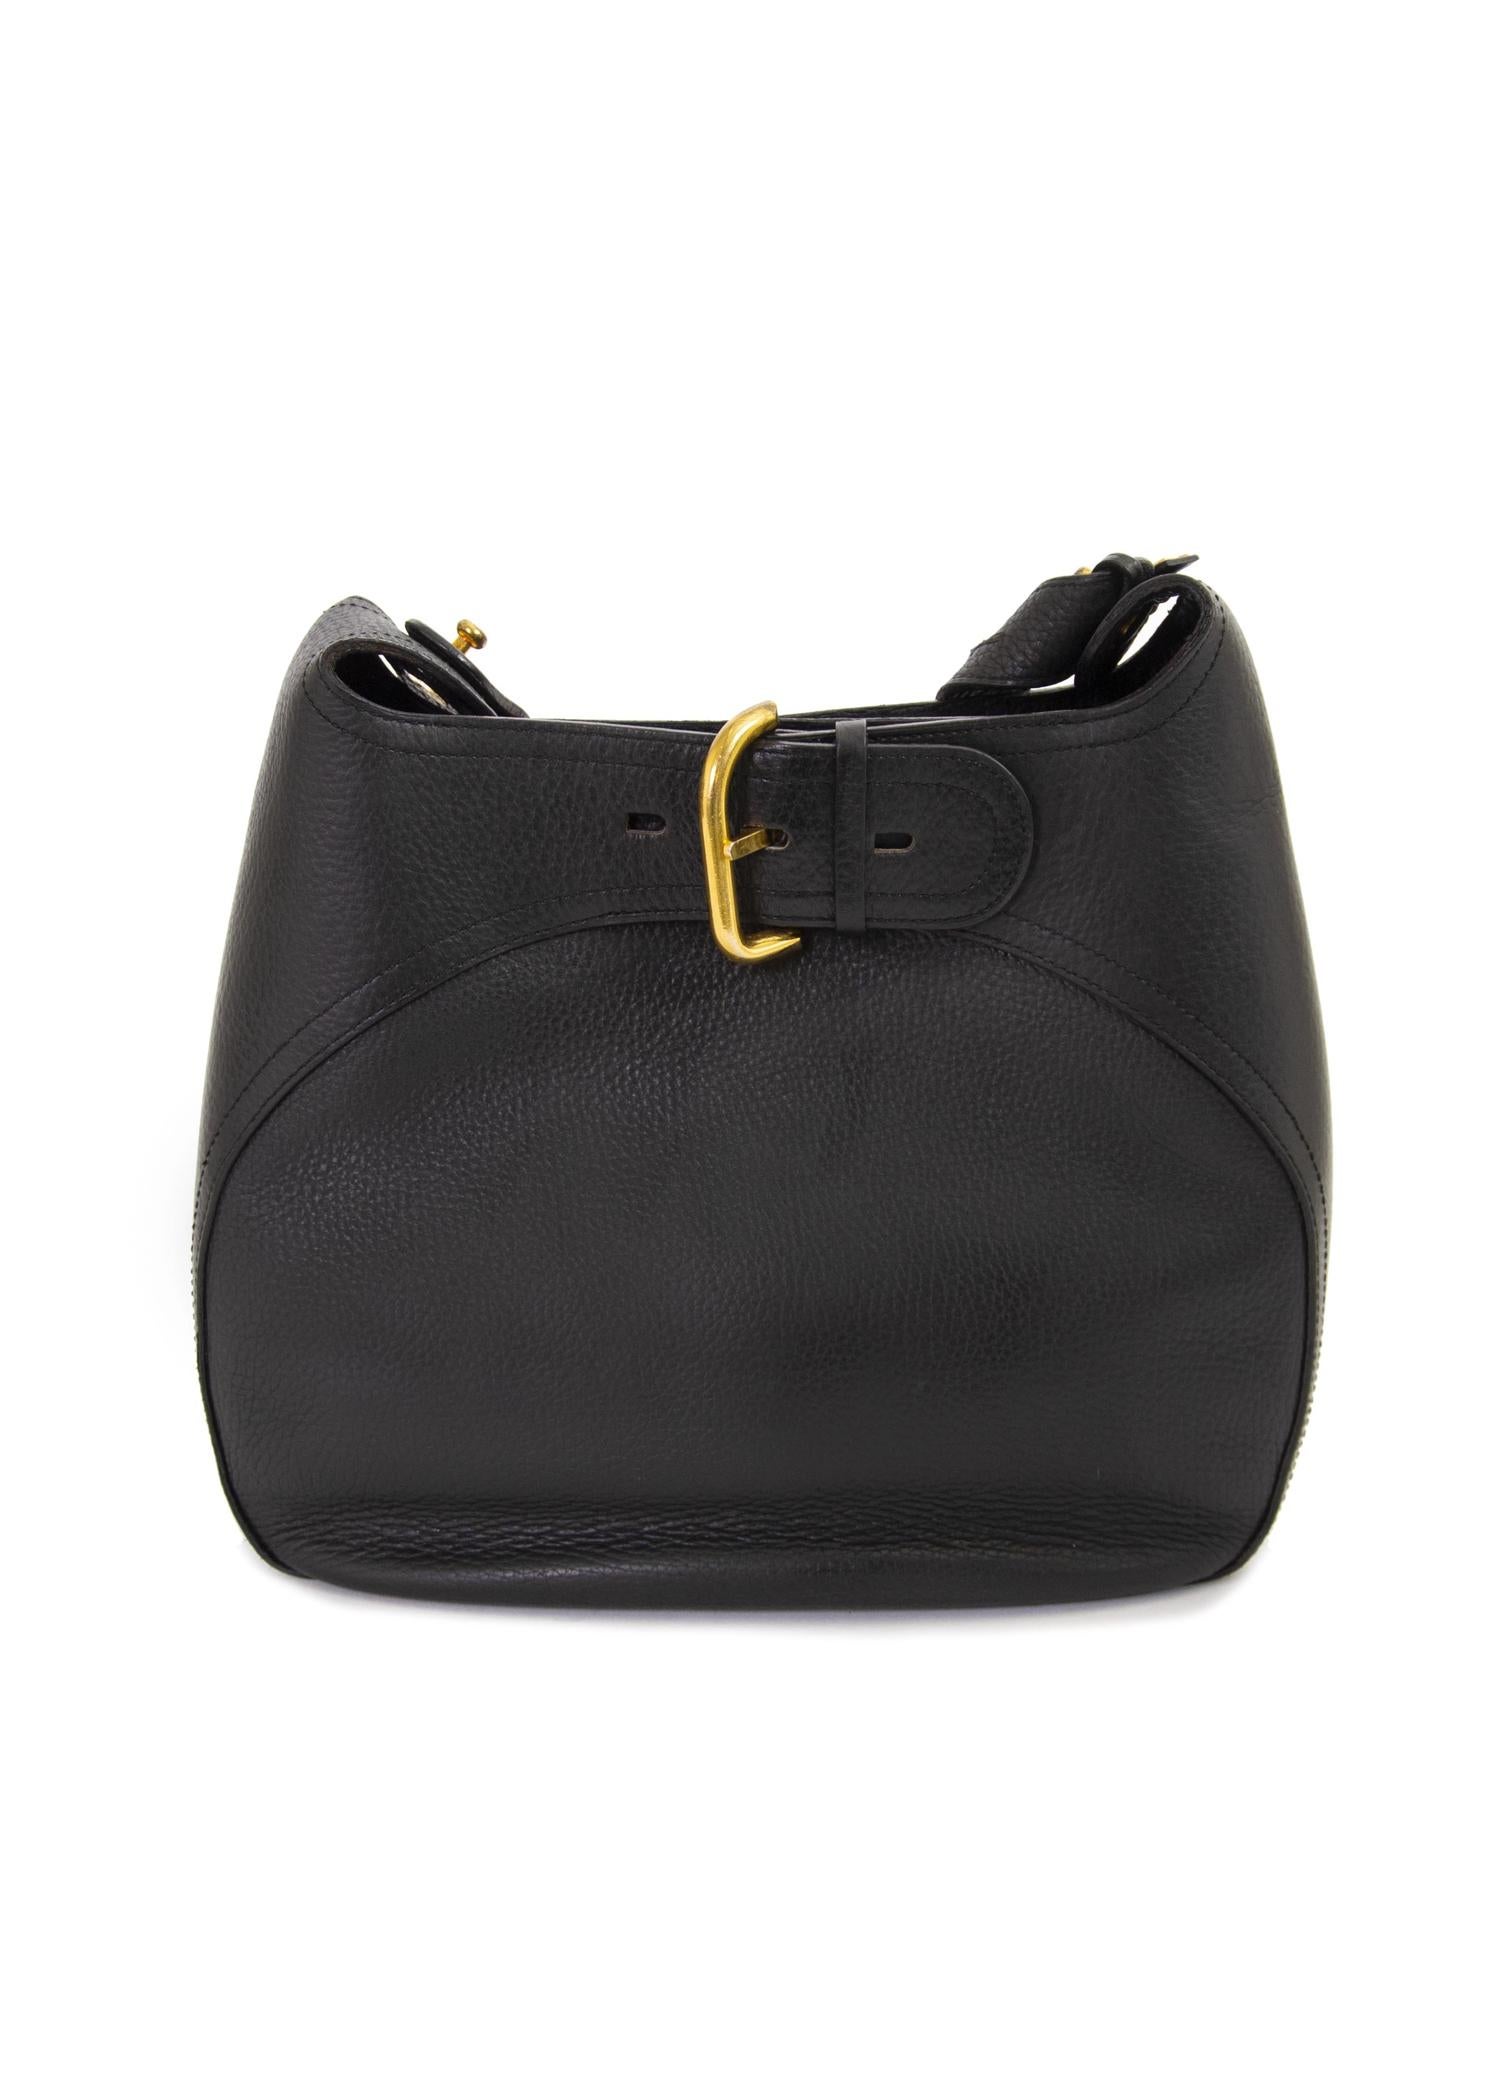 Good condition

Delvaux Black Souveraine Shoulder Bag

This gorgeous Delvaux bag is crafted from black leather and features gold-toned metal hardware.
The bag features a belt detail, giving the bag an edgy and unique look.
The main compartment opens